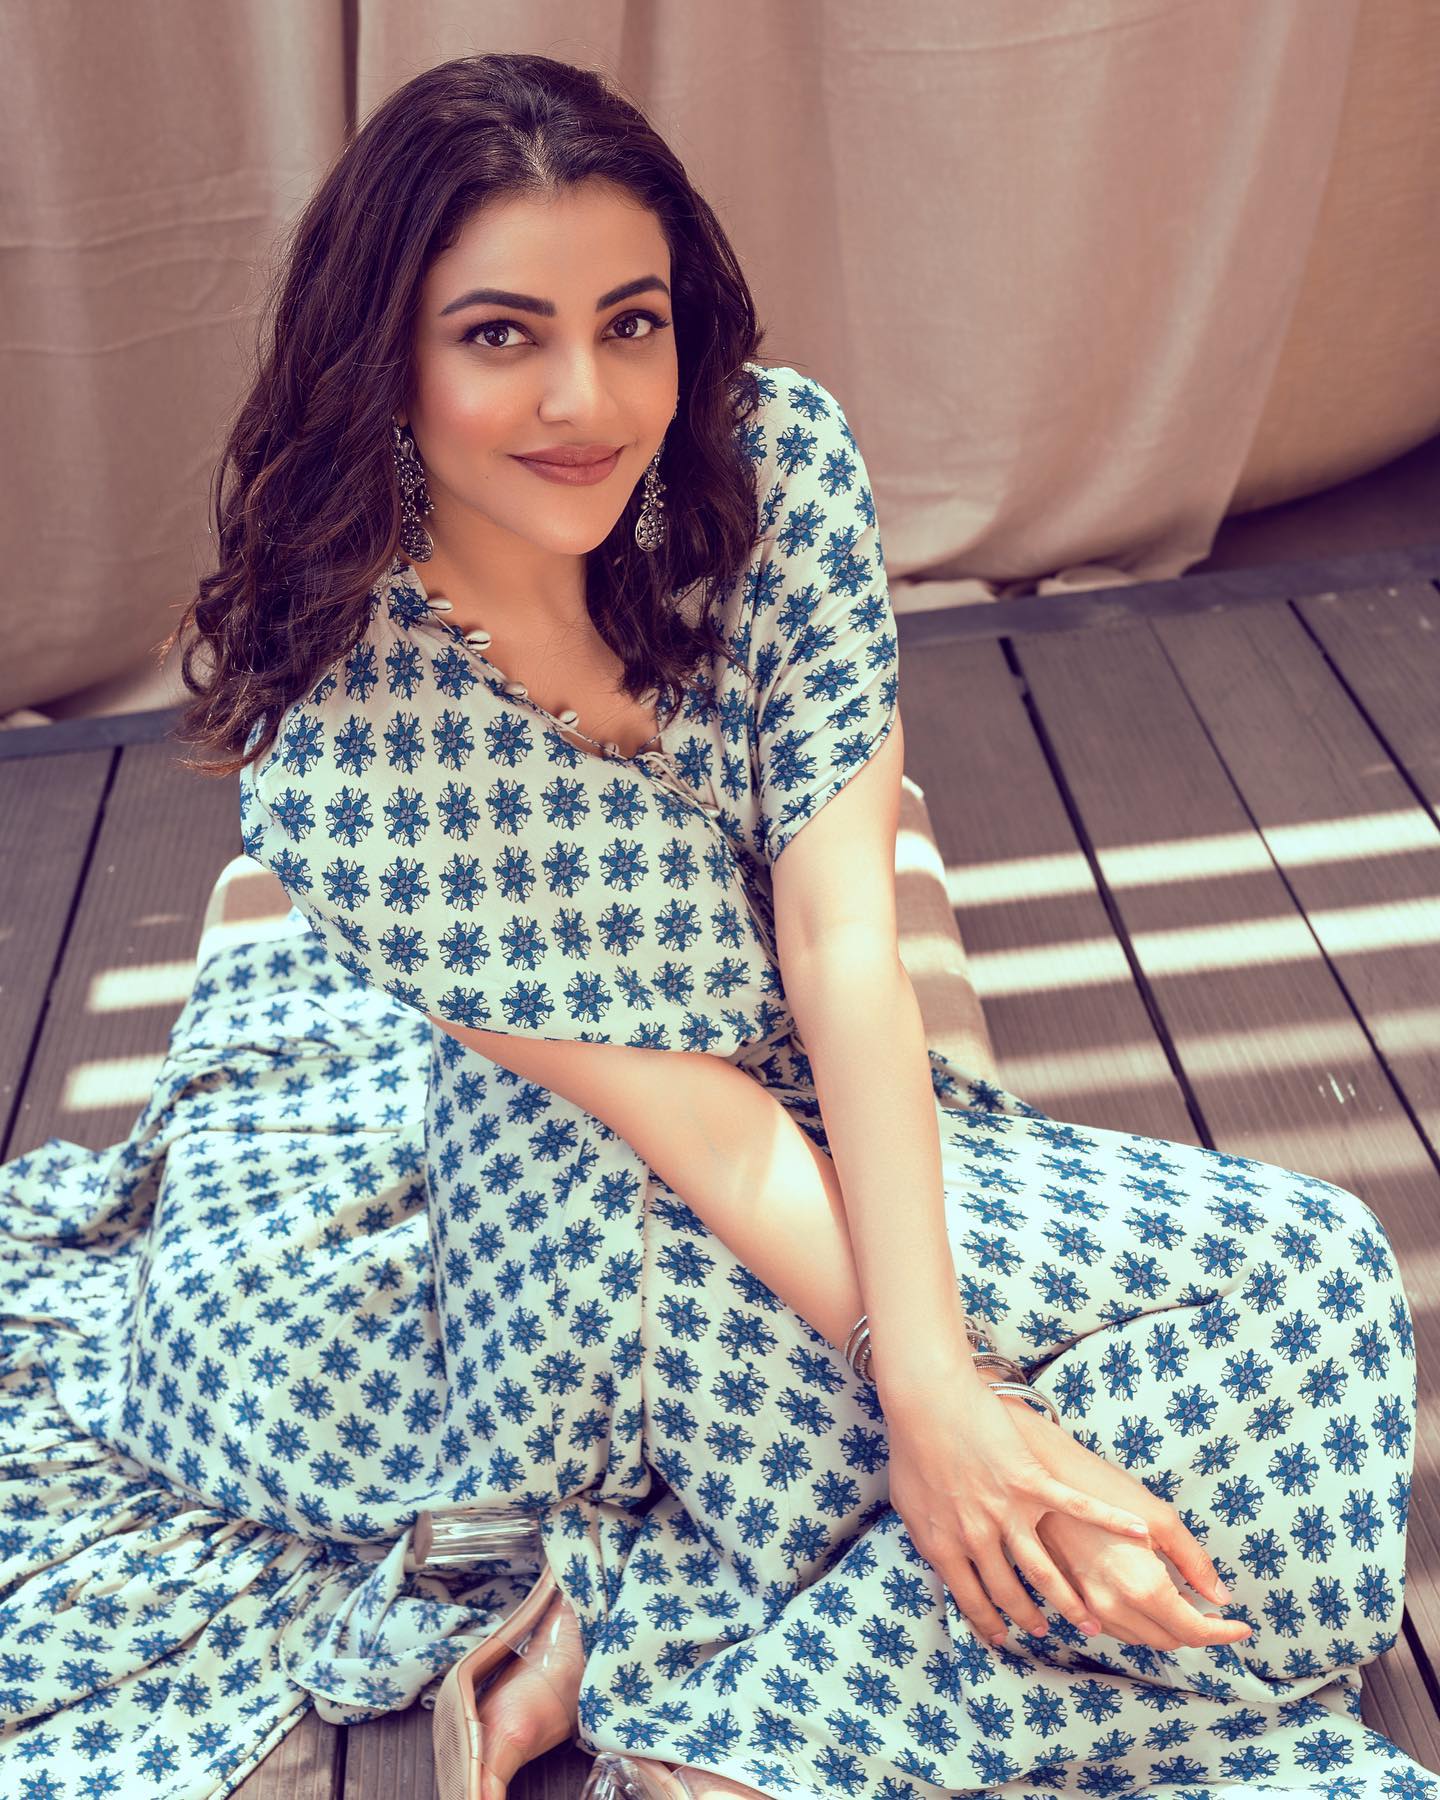 kajal-aggarwal-photoshoot-in-trending-outfit-002